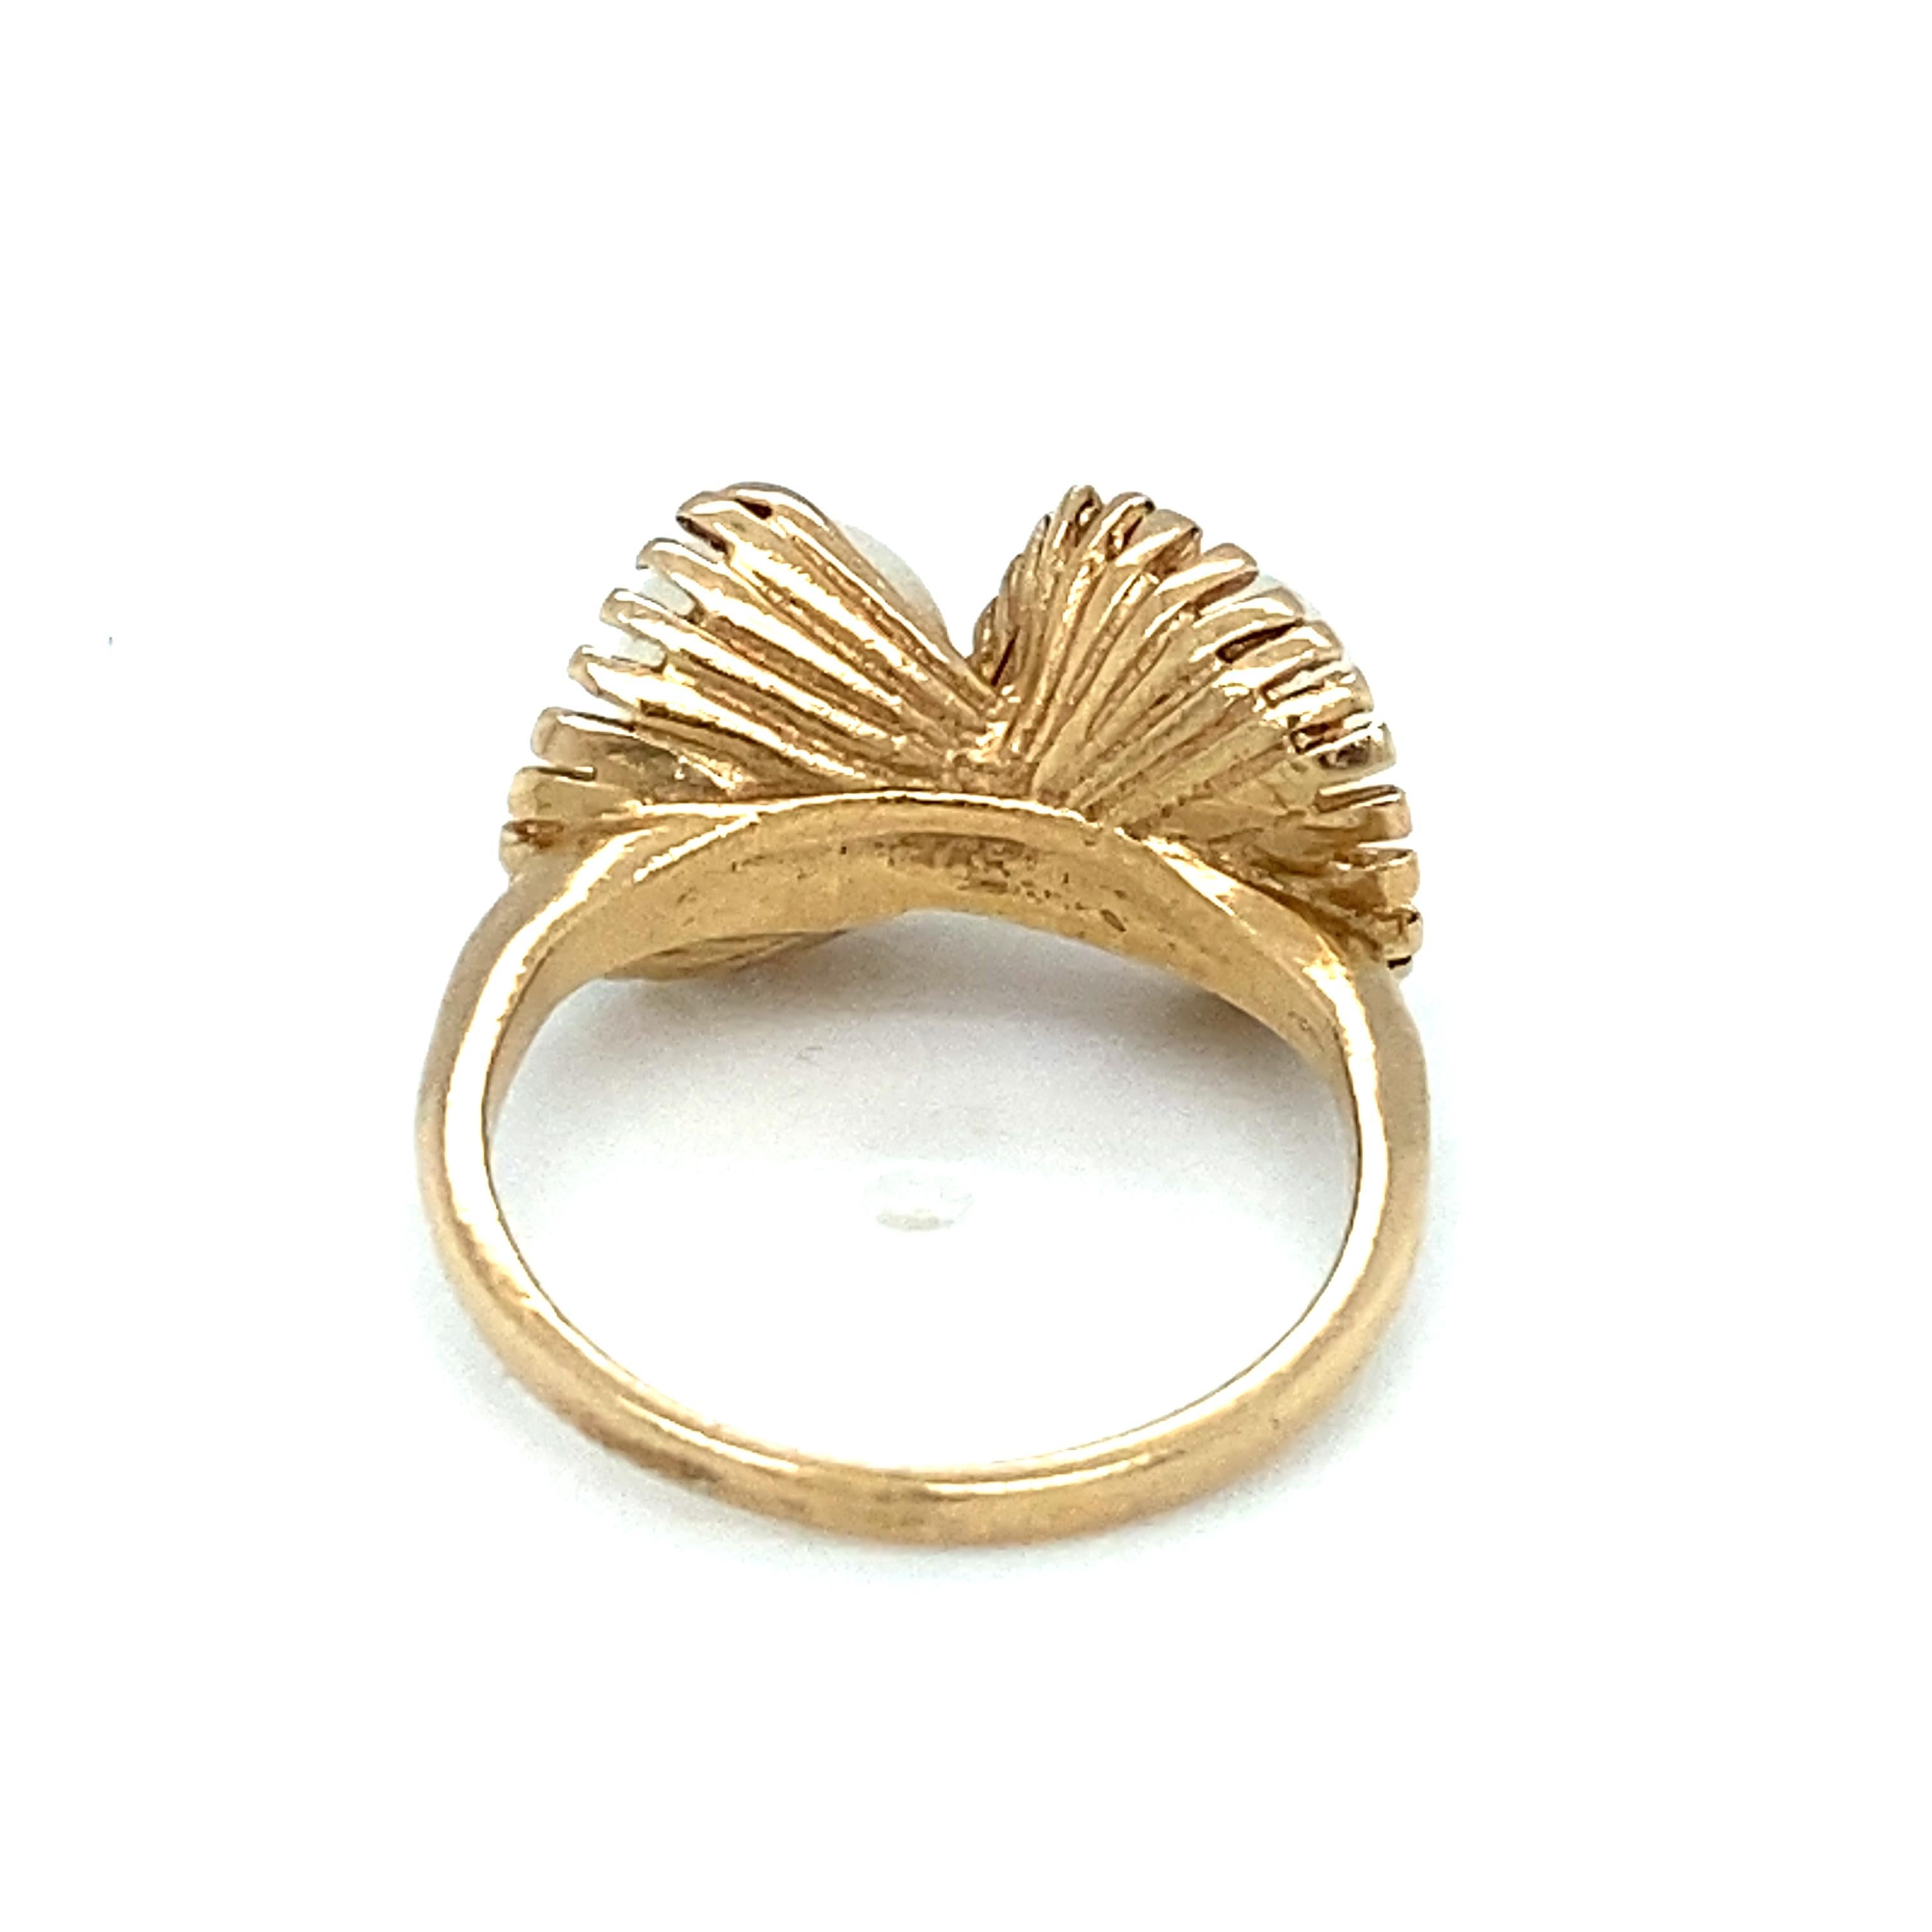 Item Details: This unique vintage ring has two twinned freshwater pearls with a crossed fan design.

Circa: 1950s
Metal Type: 14 Karat Yellow Gold
Weight: 2.9 Grams
Size: US 3, resizable